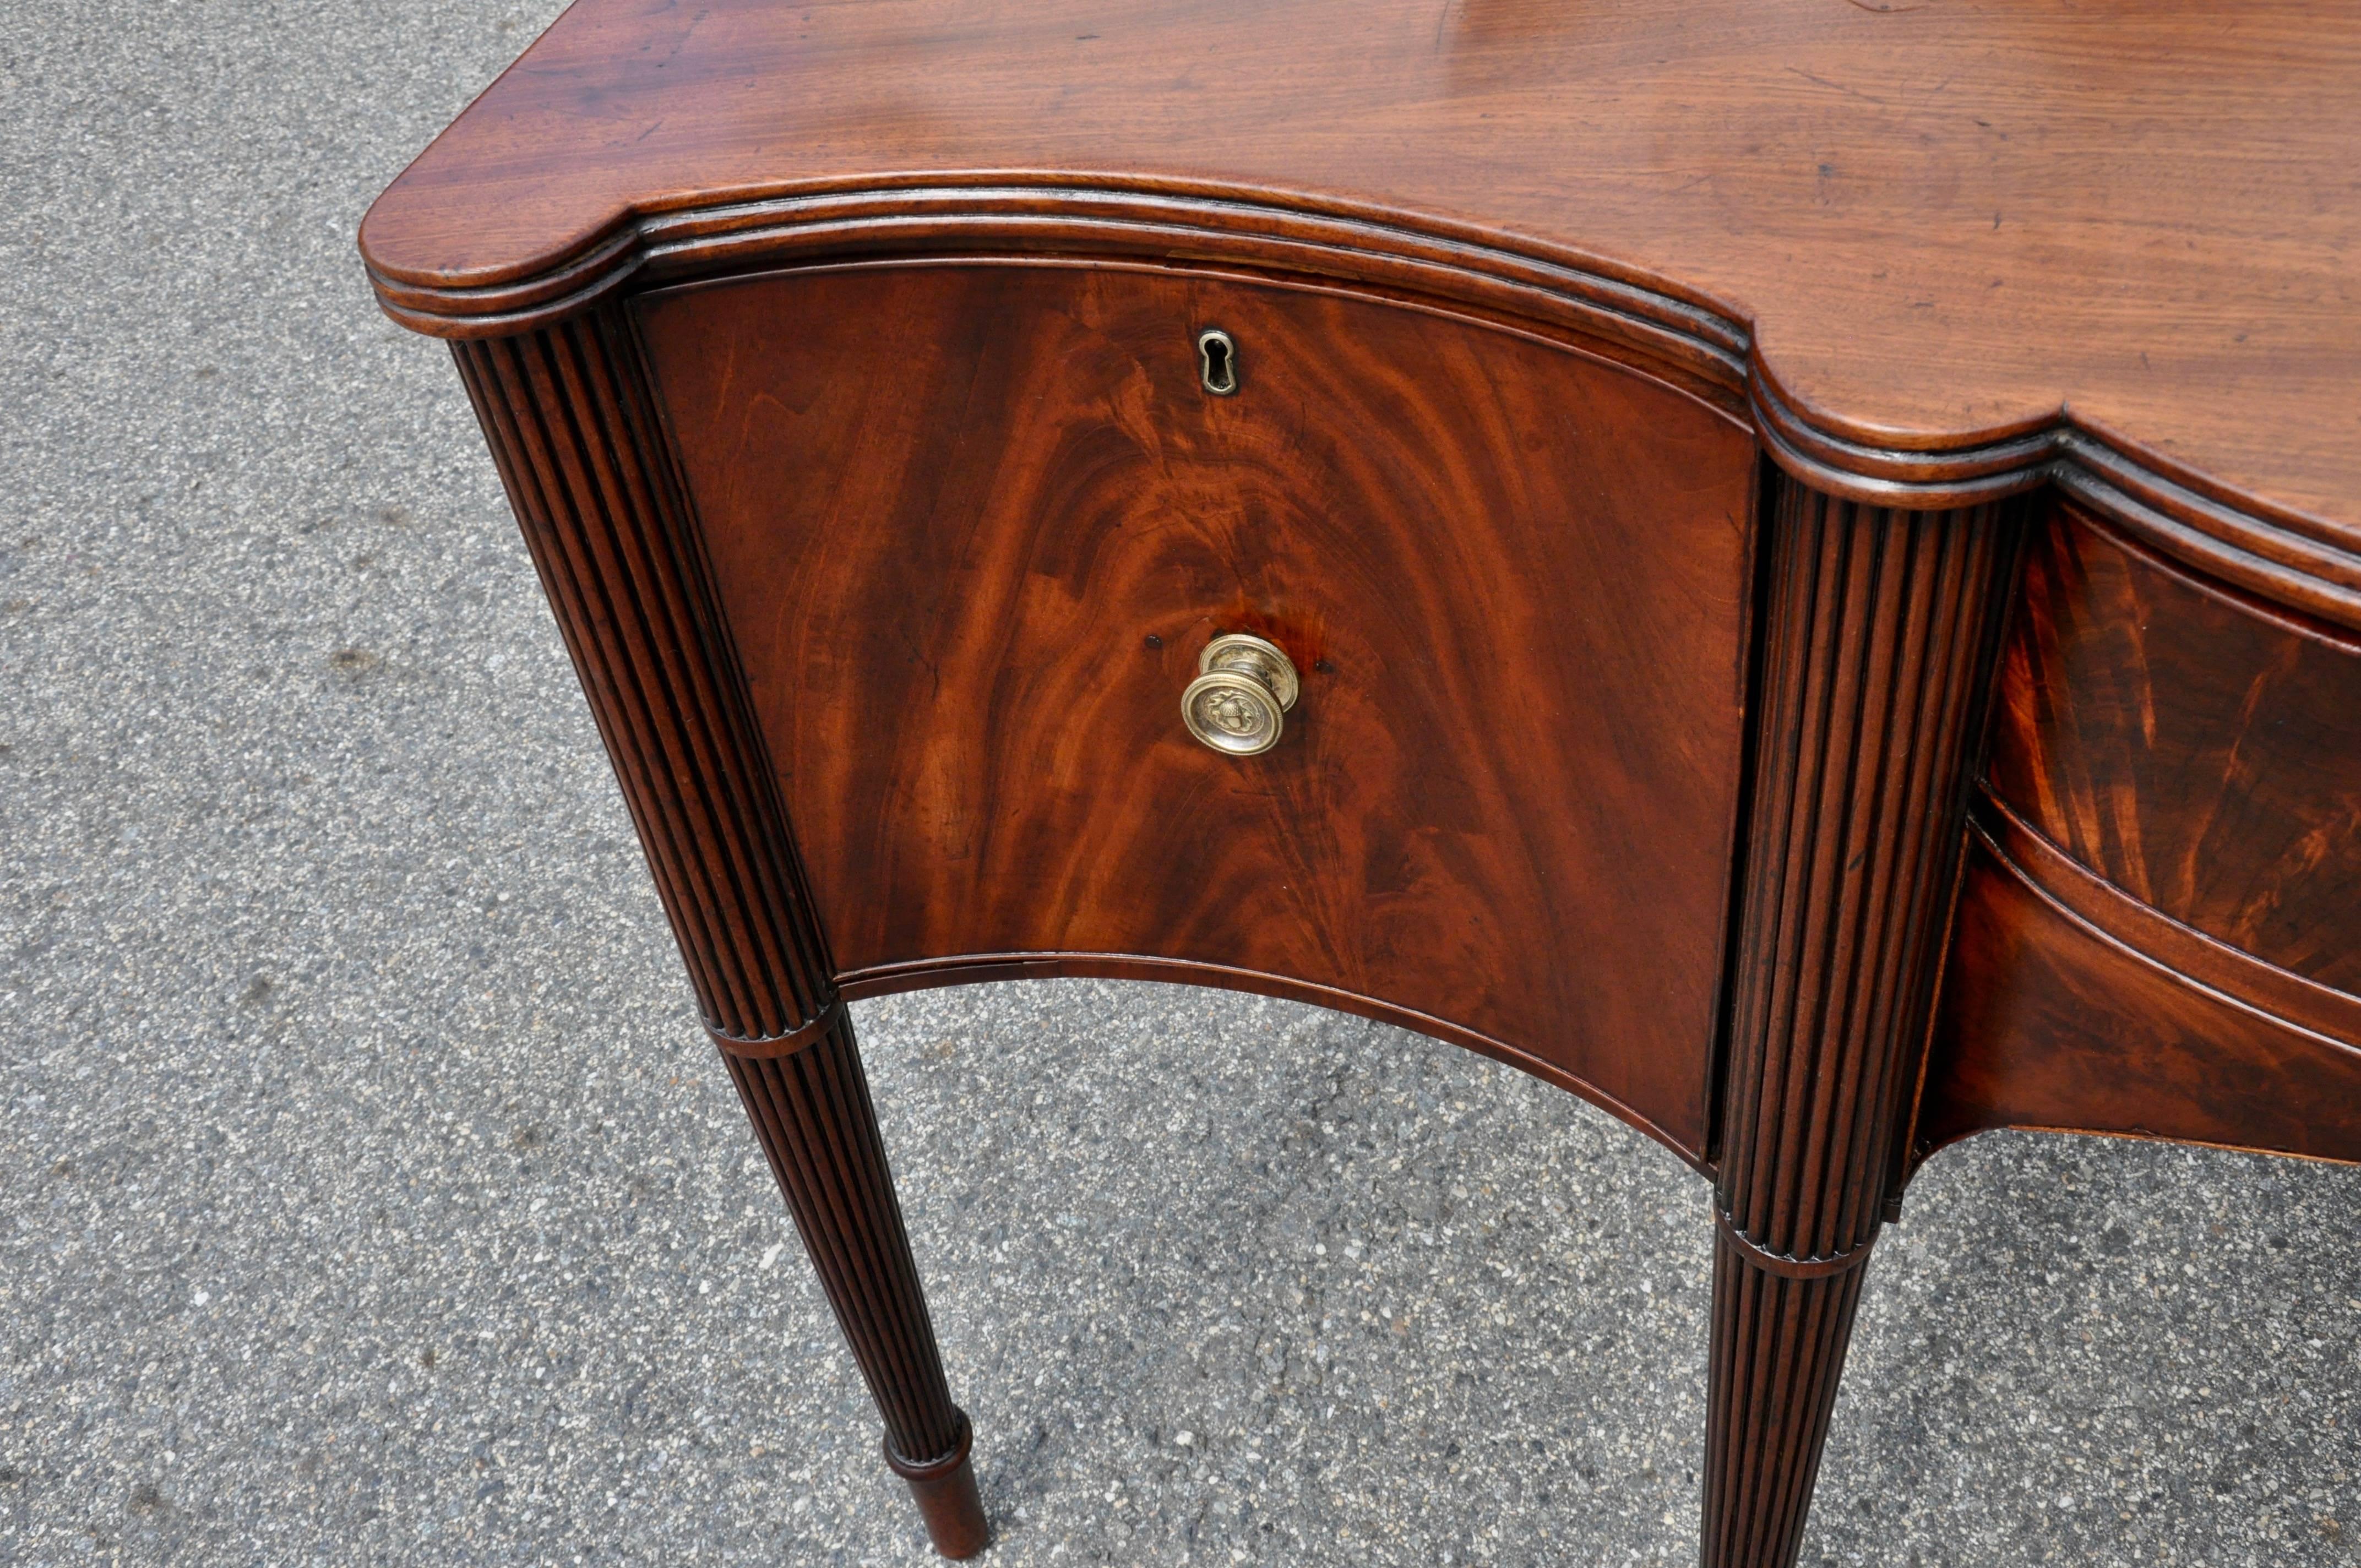 Period George III magnificently figured Cuban mahogany sideboard.

Bowfront
Original finish cleaned and waxed
Beautiful patina and color
Sectioned central drawer
Flanking side wine drawers
One board top.